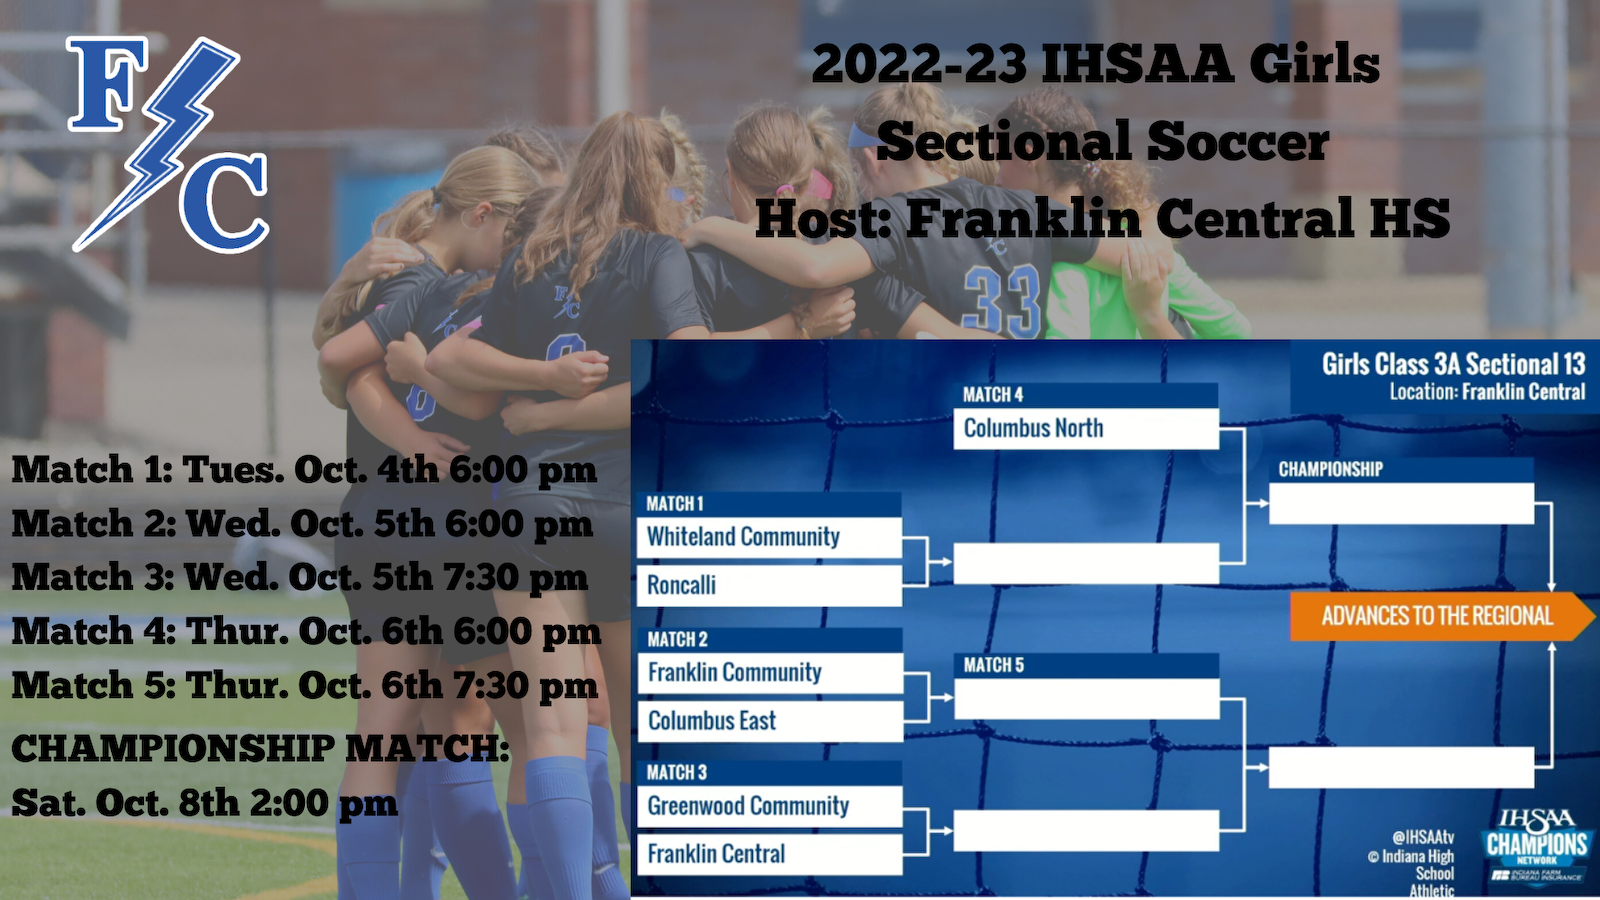 2022-23 IHSAA Girls Sectional Soccer Draw cover photo